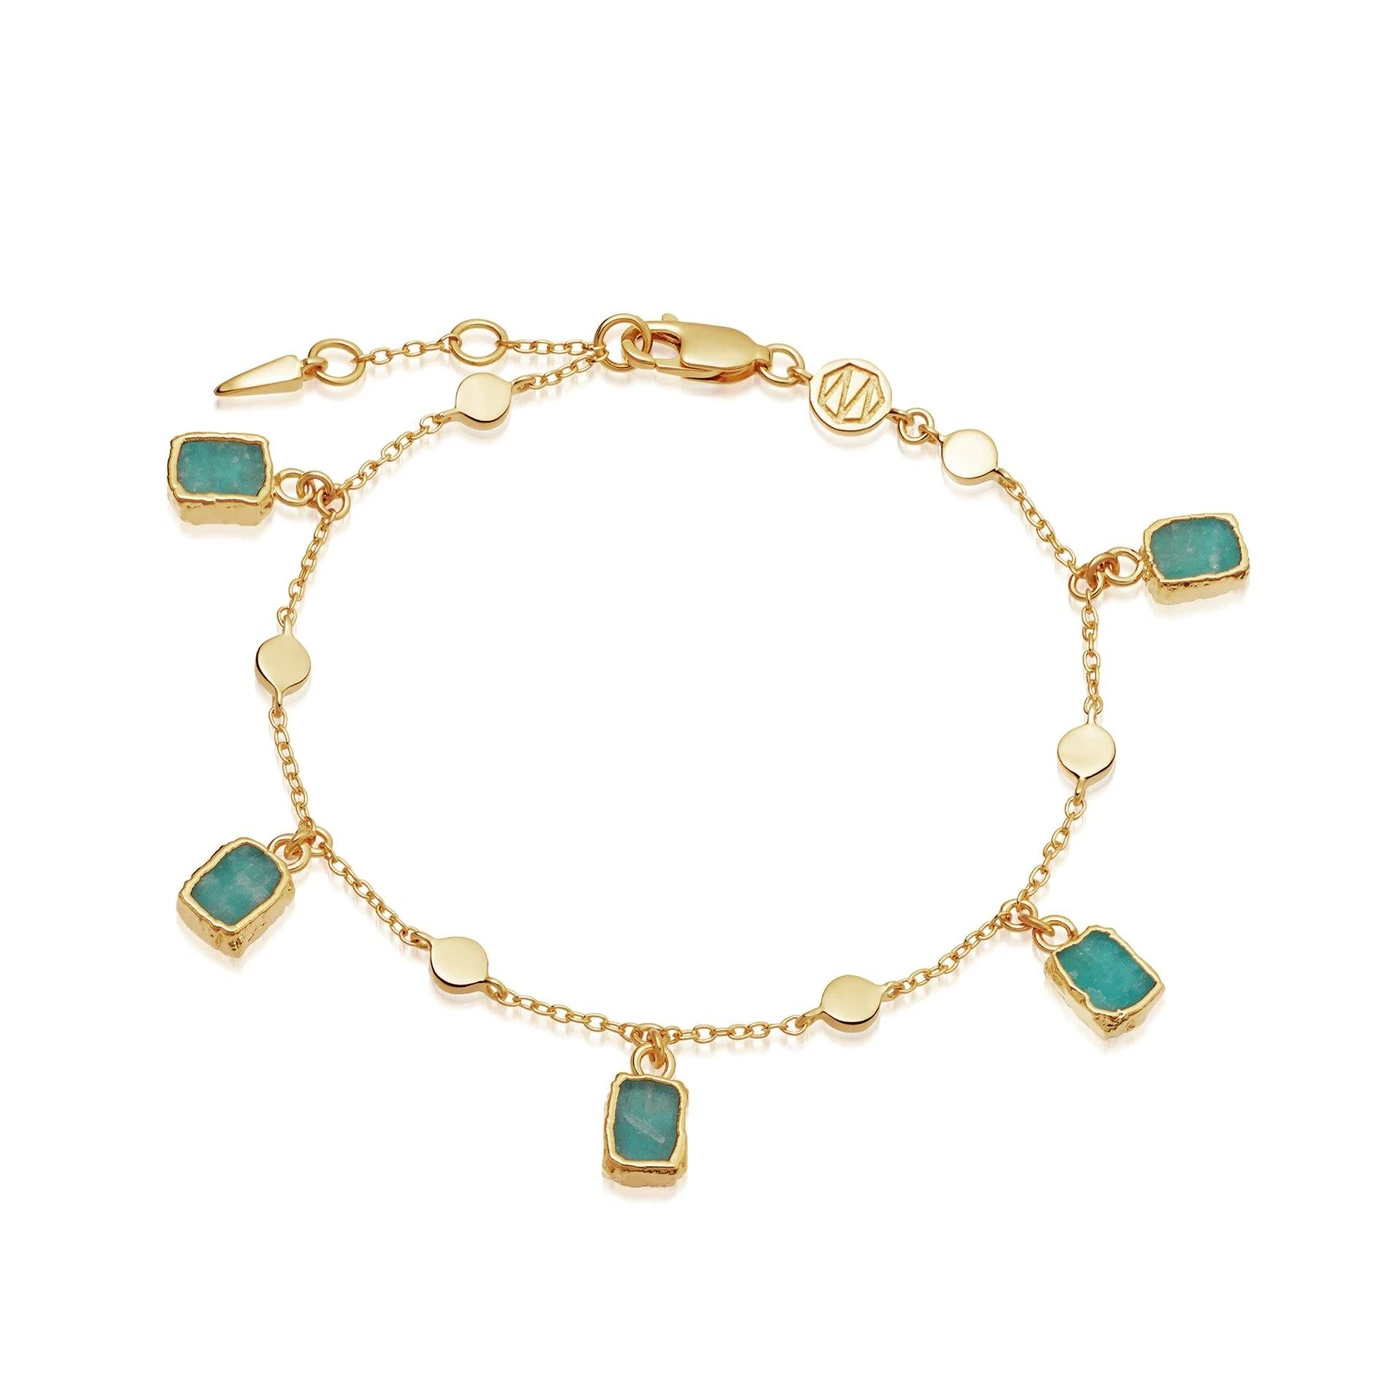 Wholesale OEM 18ct Gold Vermeil charm bracelet on OEM/ODM Jewelry Sterling Silver with Green Amazonite stones